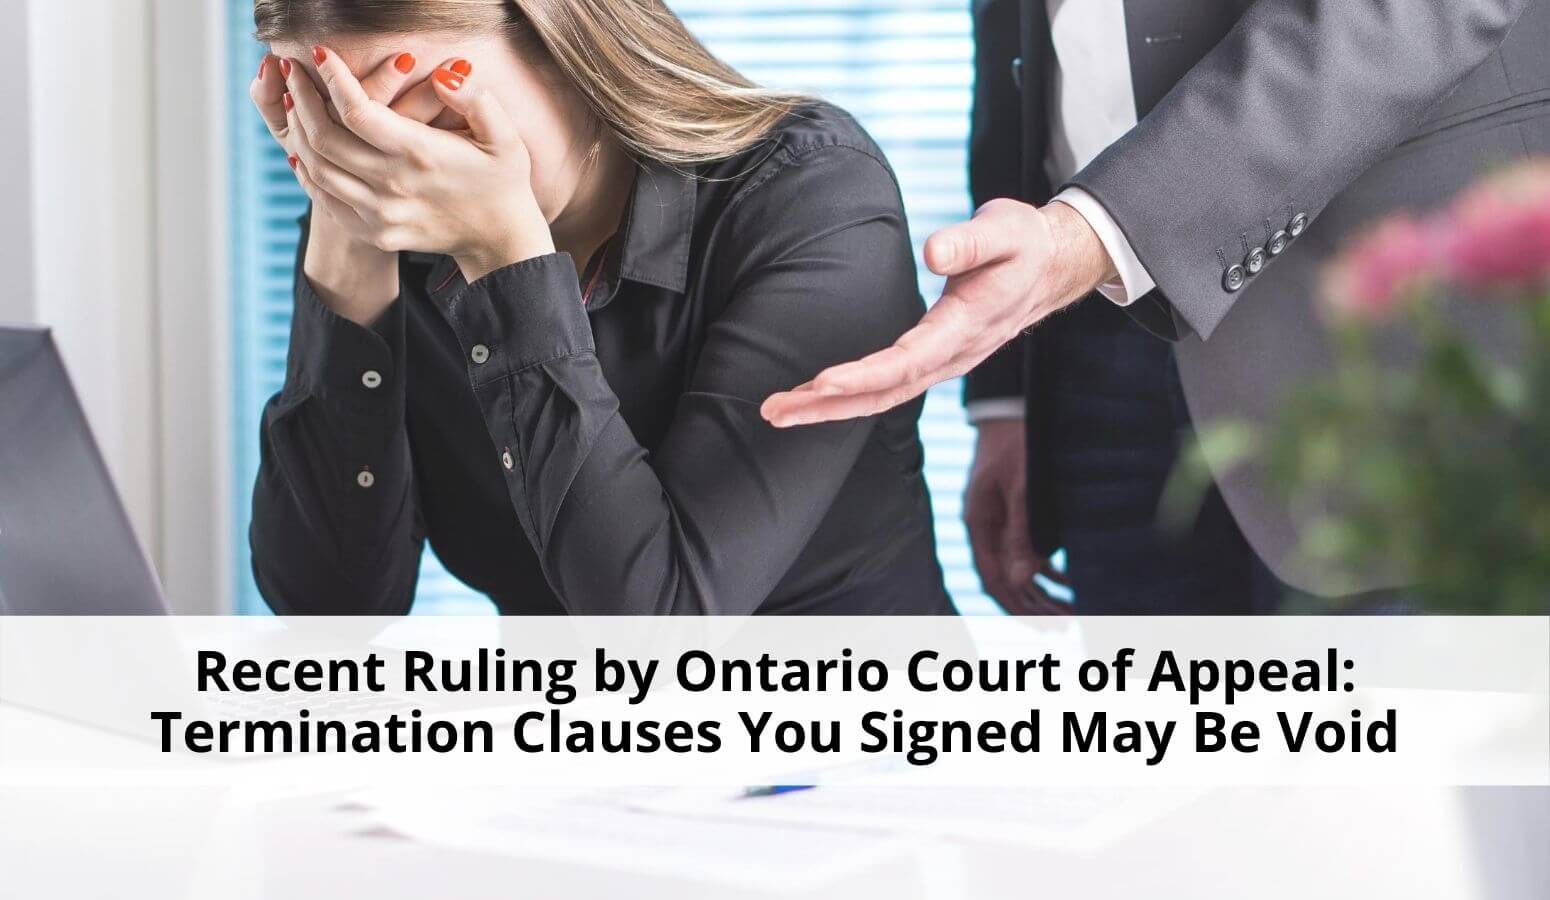 Featured image for “The Termination Clauses You Signed May Be Void: Recent Ruling by Ontario Court of Appeal”